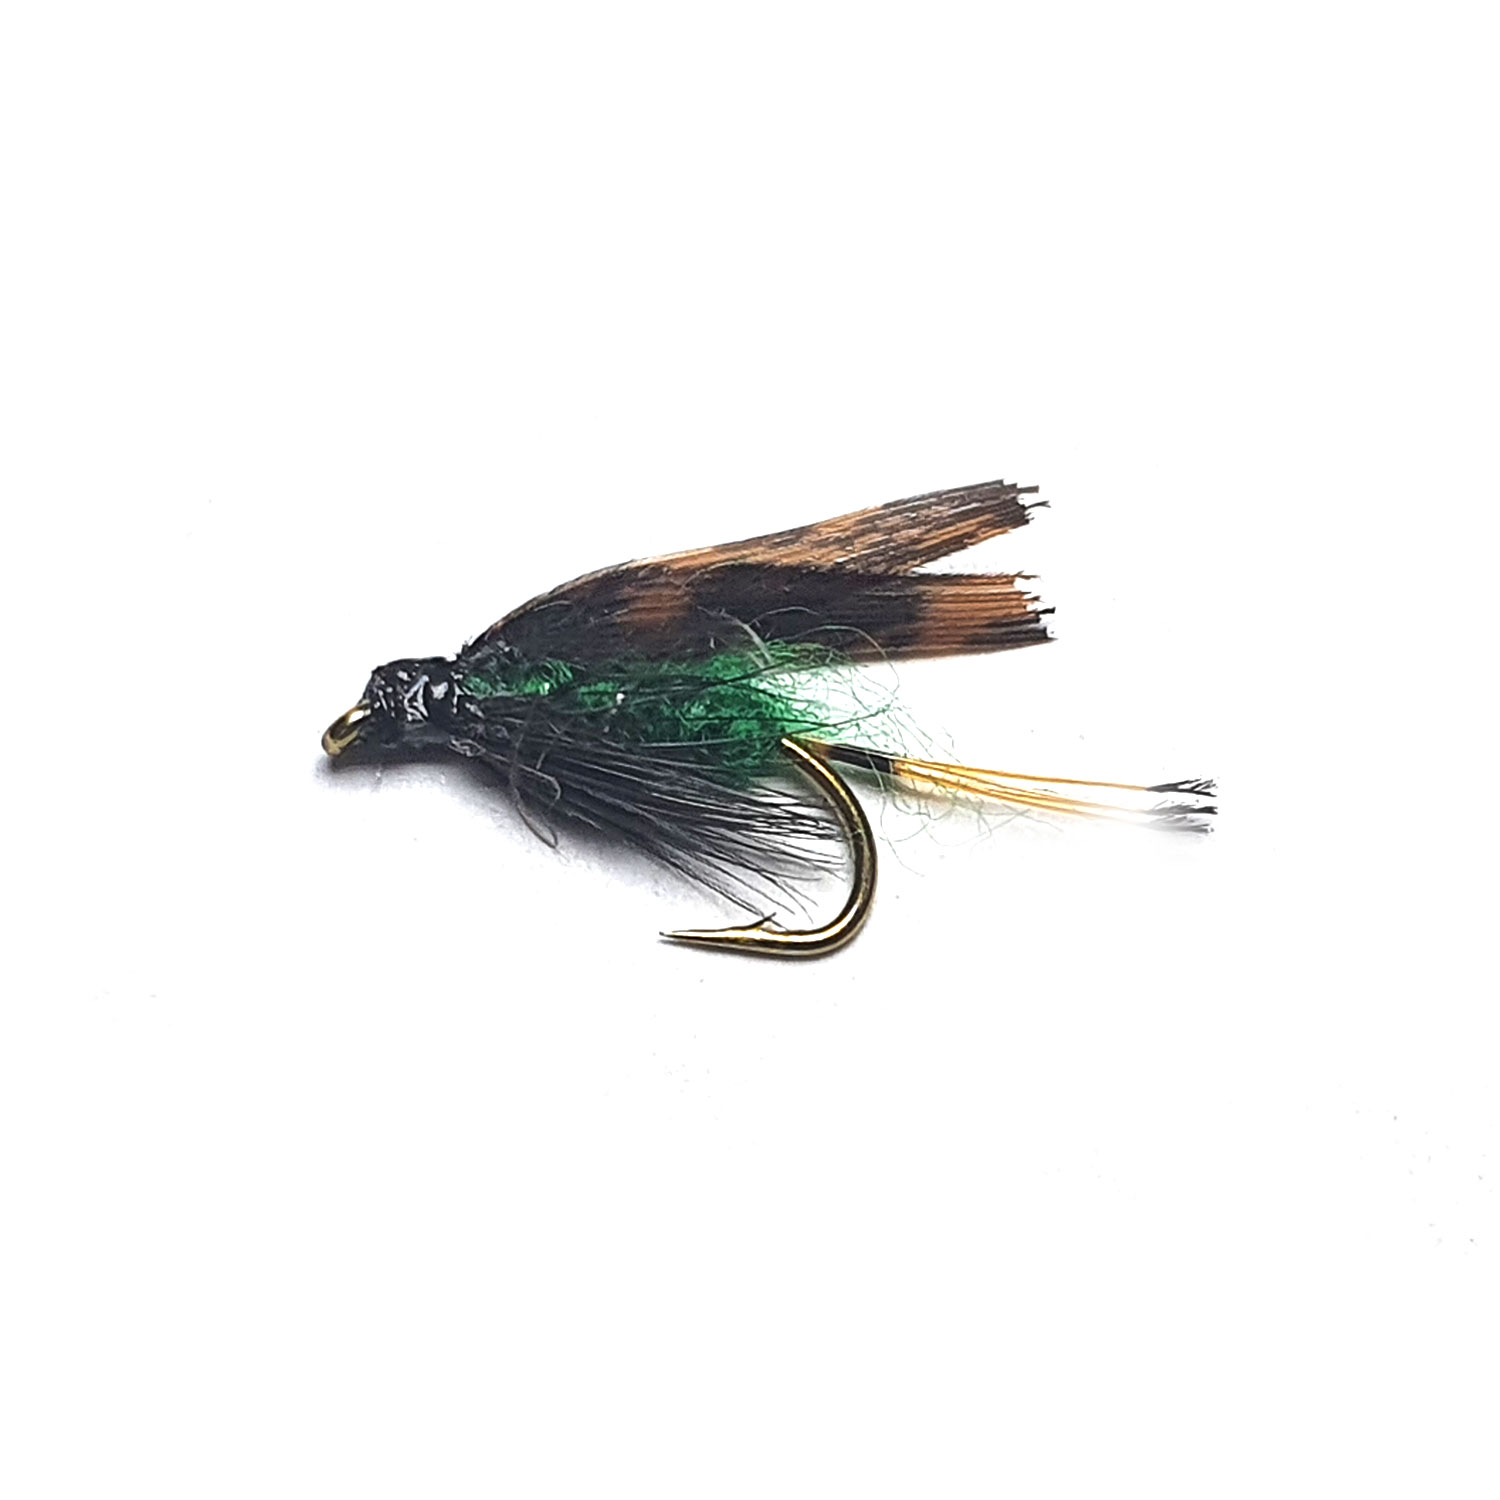 Grouse and Green Wet Fly Size 12 - 1 Dozen